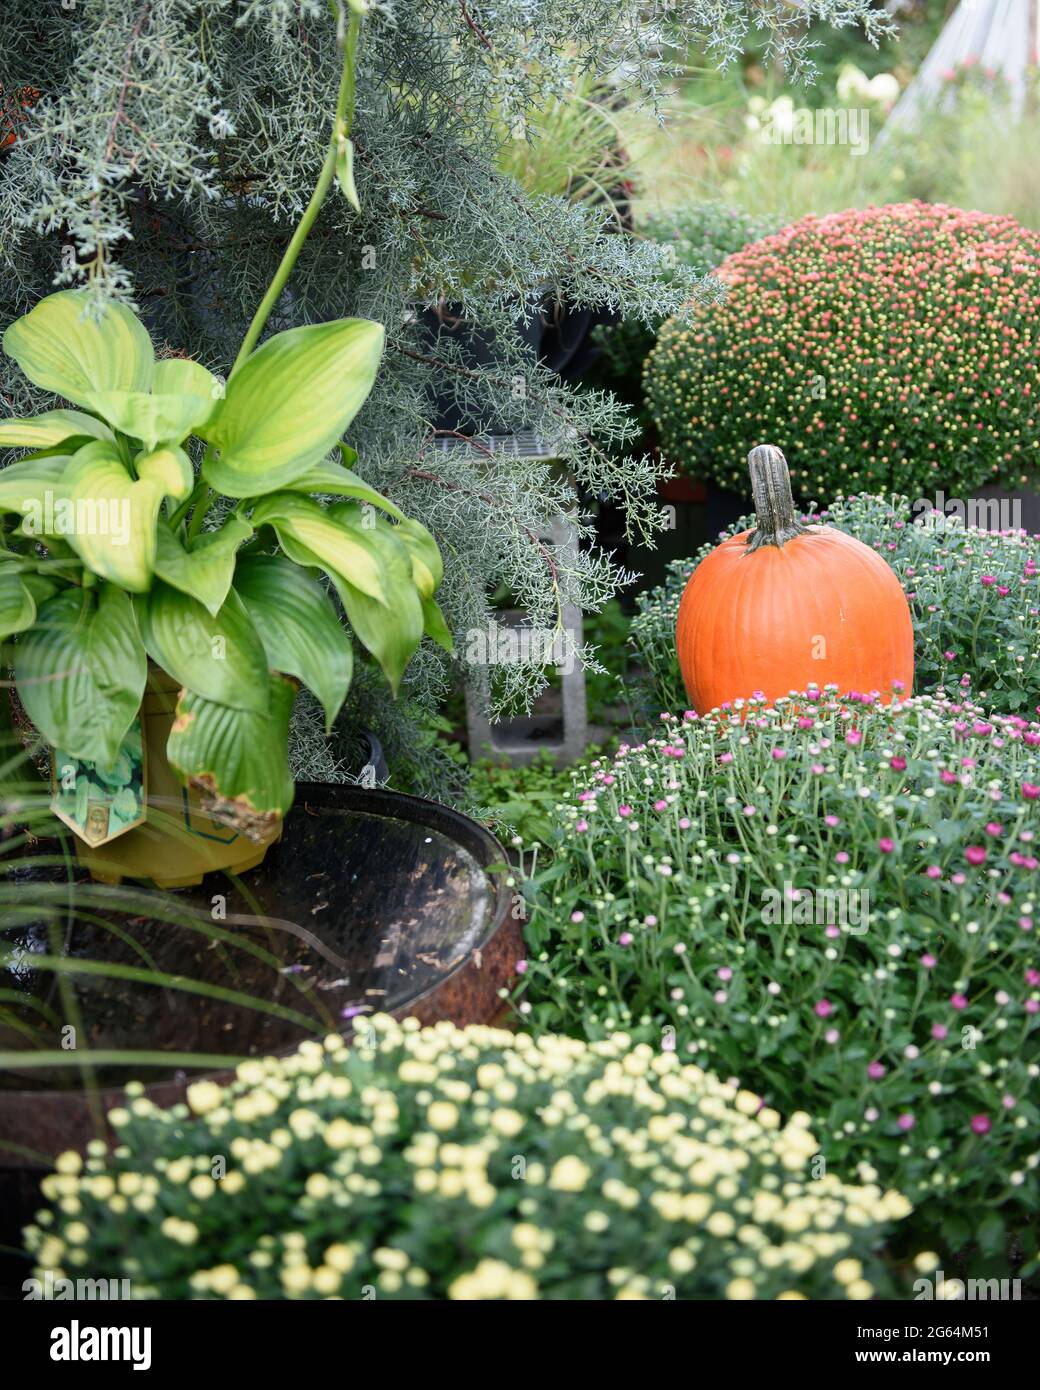 One vibrantly colored, orange pumpkin set among flowers and shrubs in a farmers market. Stock Photo